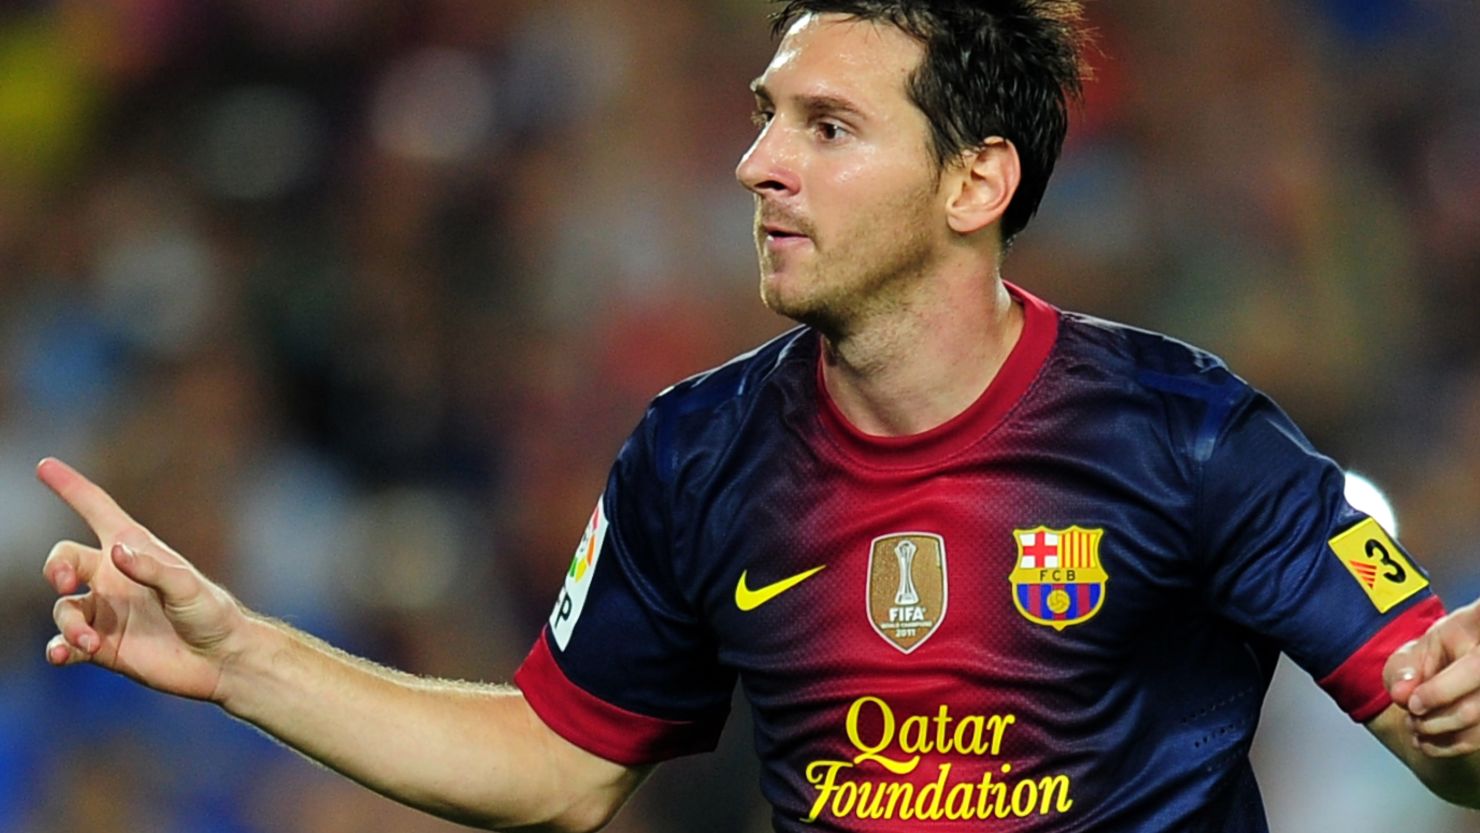 Lionel Messi celebrates scoring from the penalty spot in Barcelona's 3-2 Spanish Super Cup win over Real Madrid.